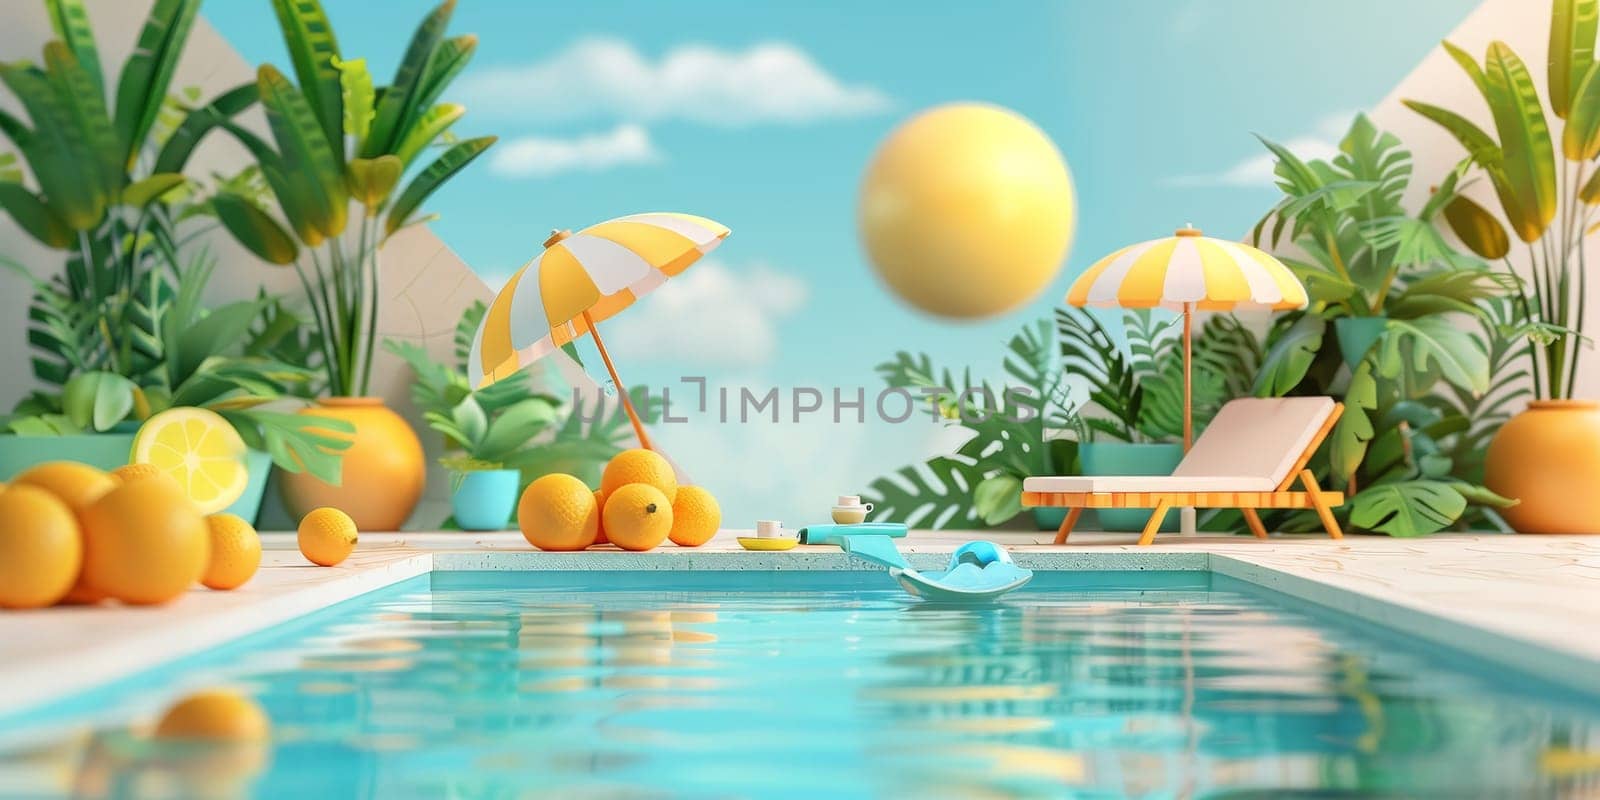 A cartoonish scene of a pool with a yellow sun in the sky and two umbrellas